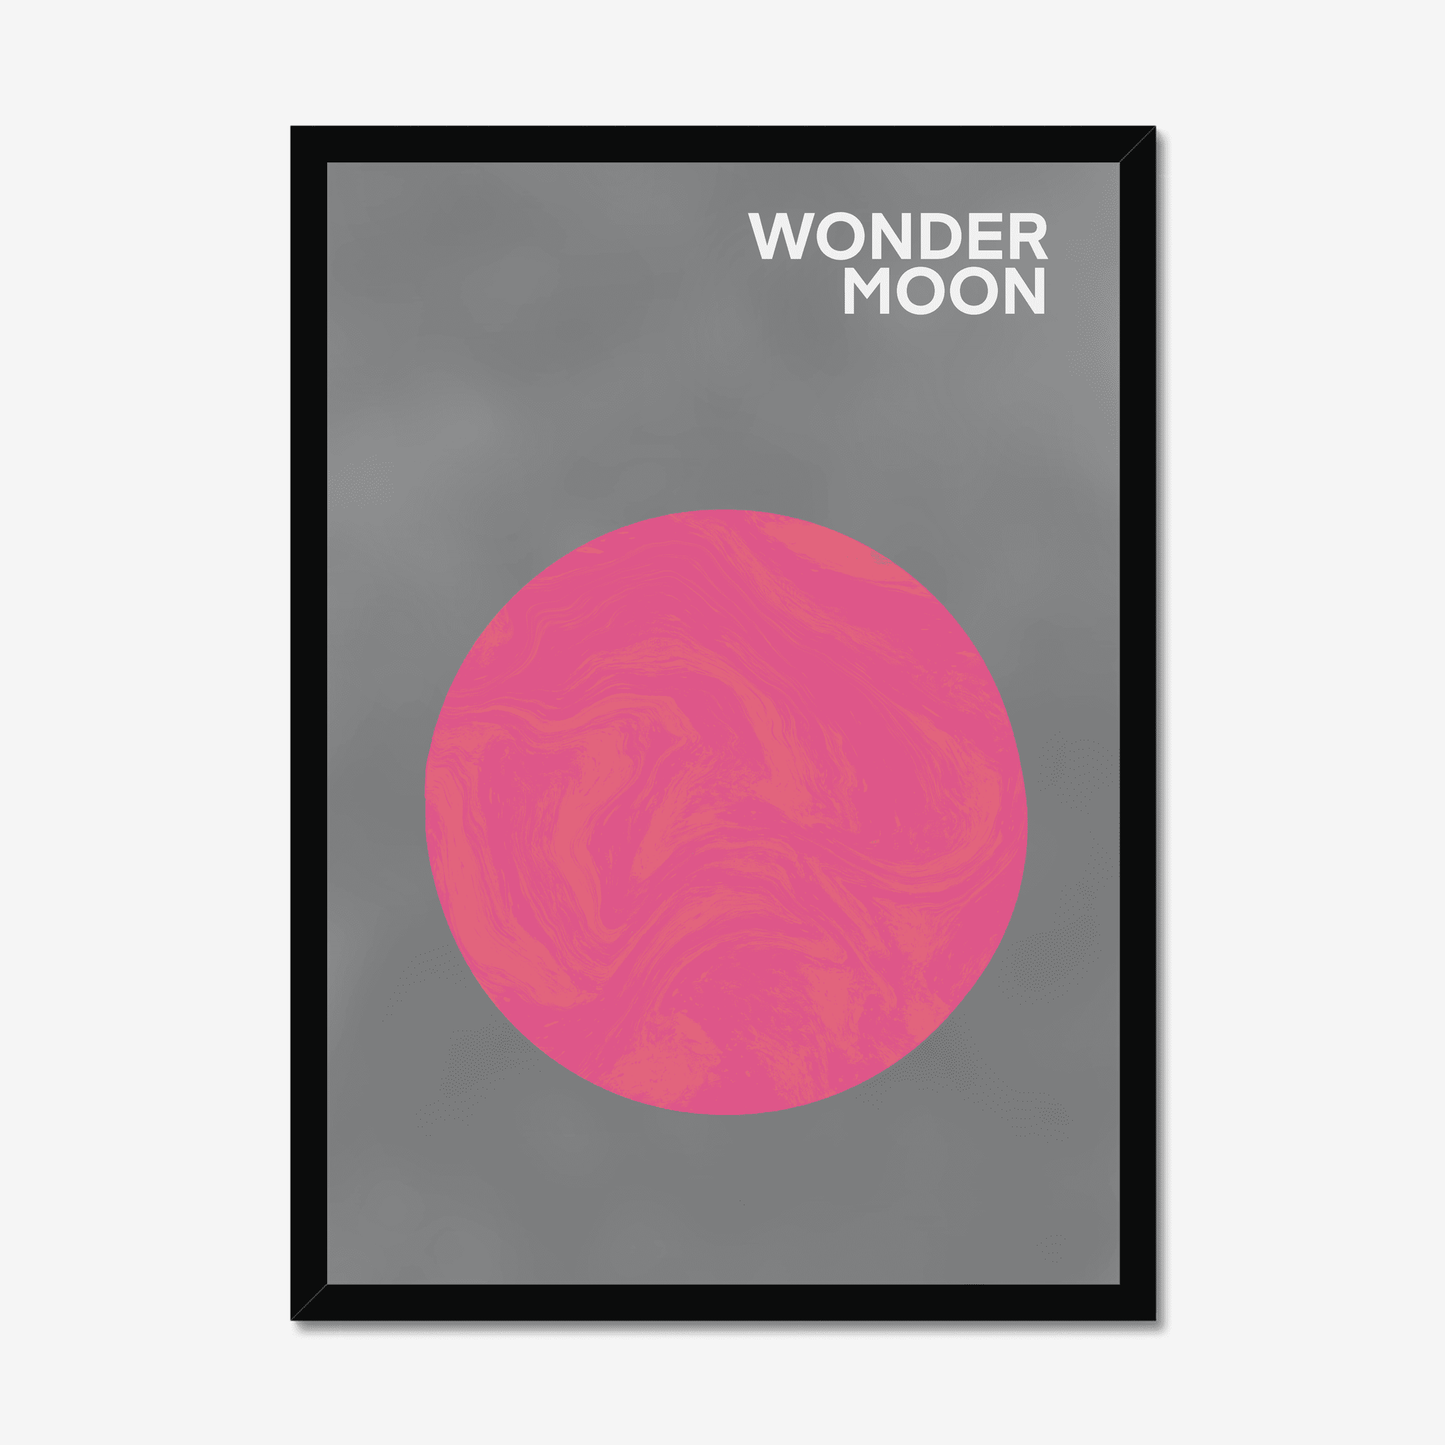 We're obsessed with this unique luna print.  A marble effect moon on a grey sky background.  We've got this one in a natural frame in our print office and we love it!